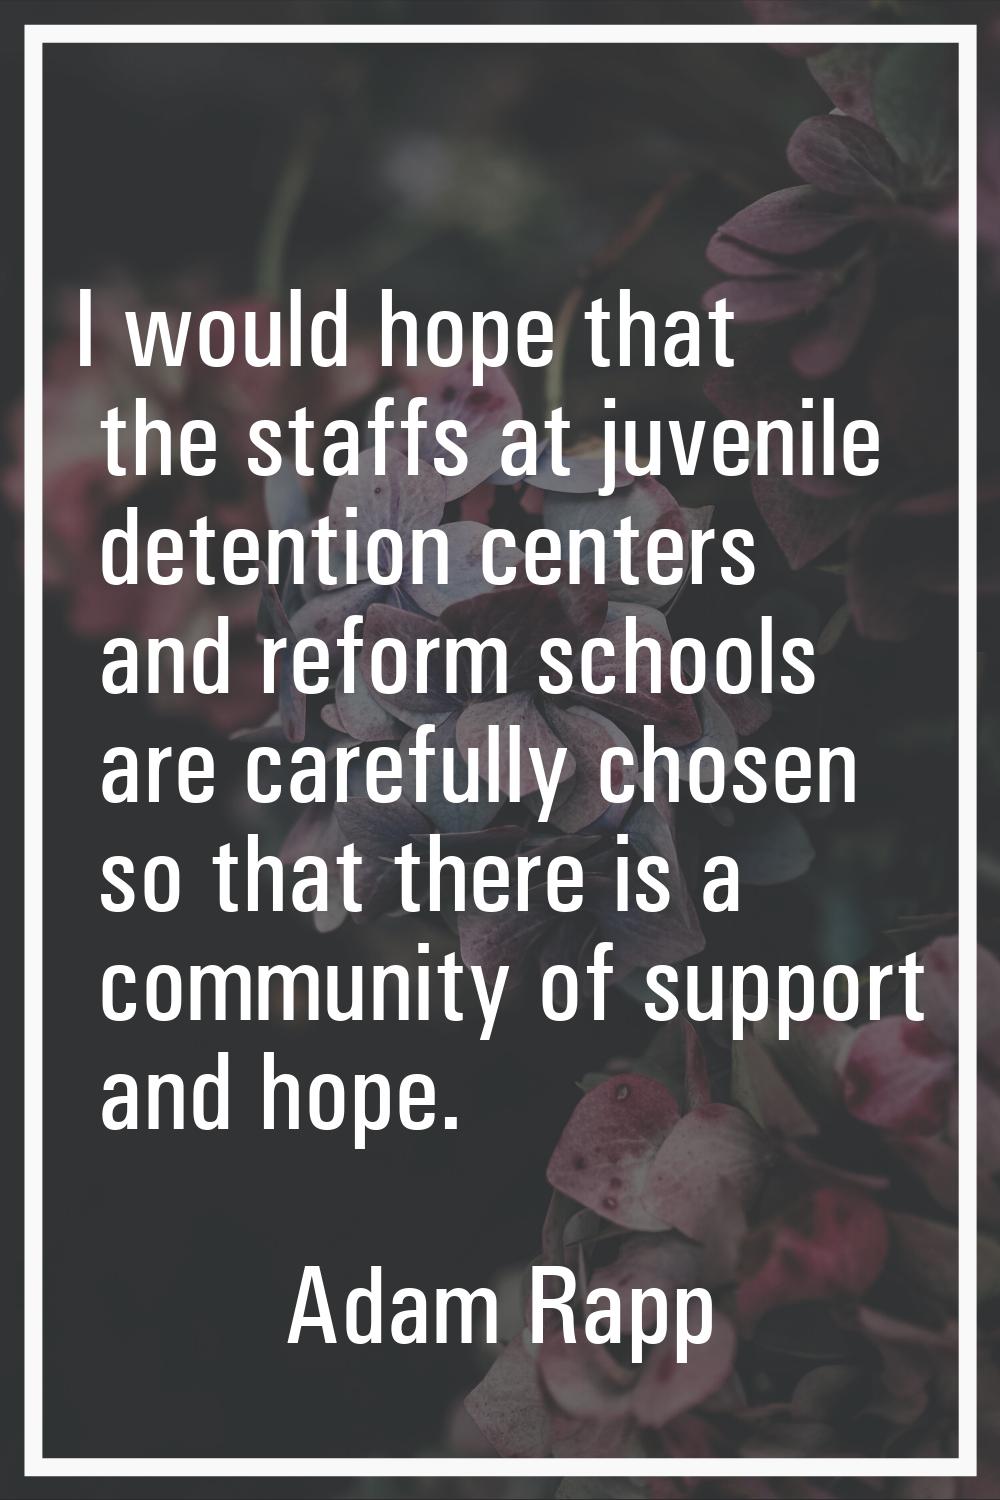 I would hope that the staffs at juvenile detention centers and reform schools are carefully chosen 